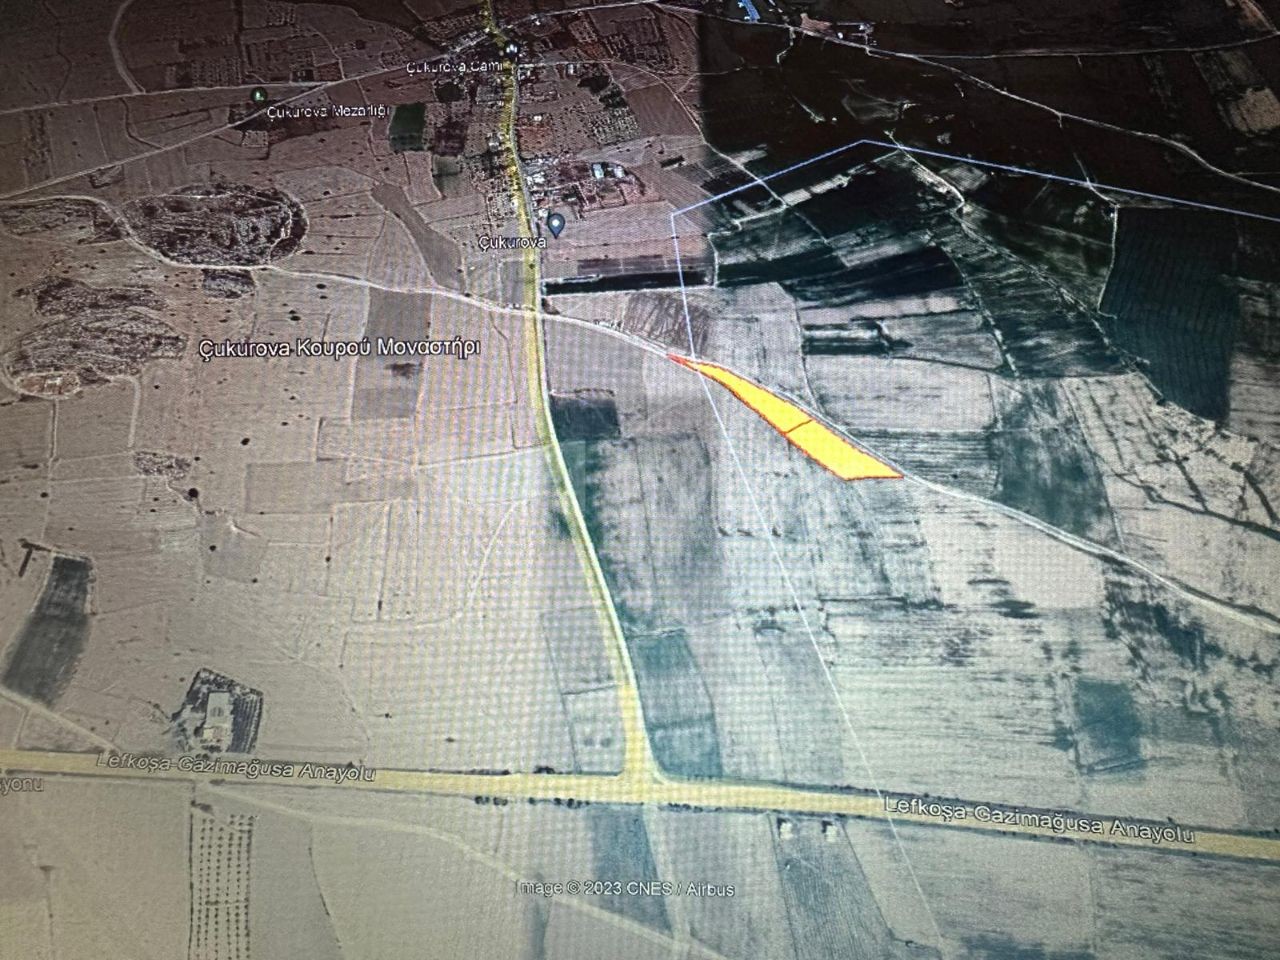 22.000 stg acre of ready land for sale parceling project on Famagusta Main Road